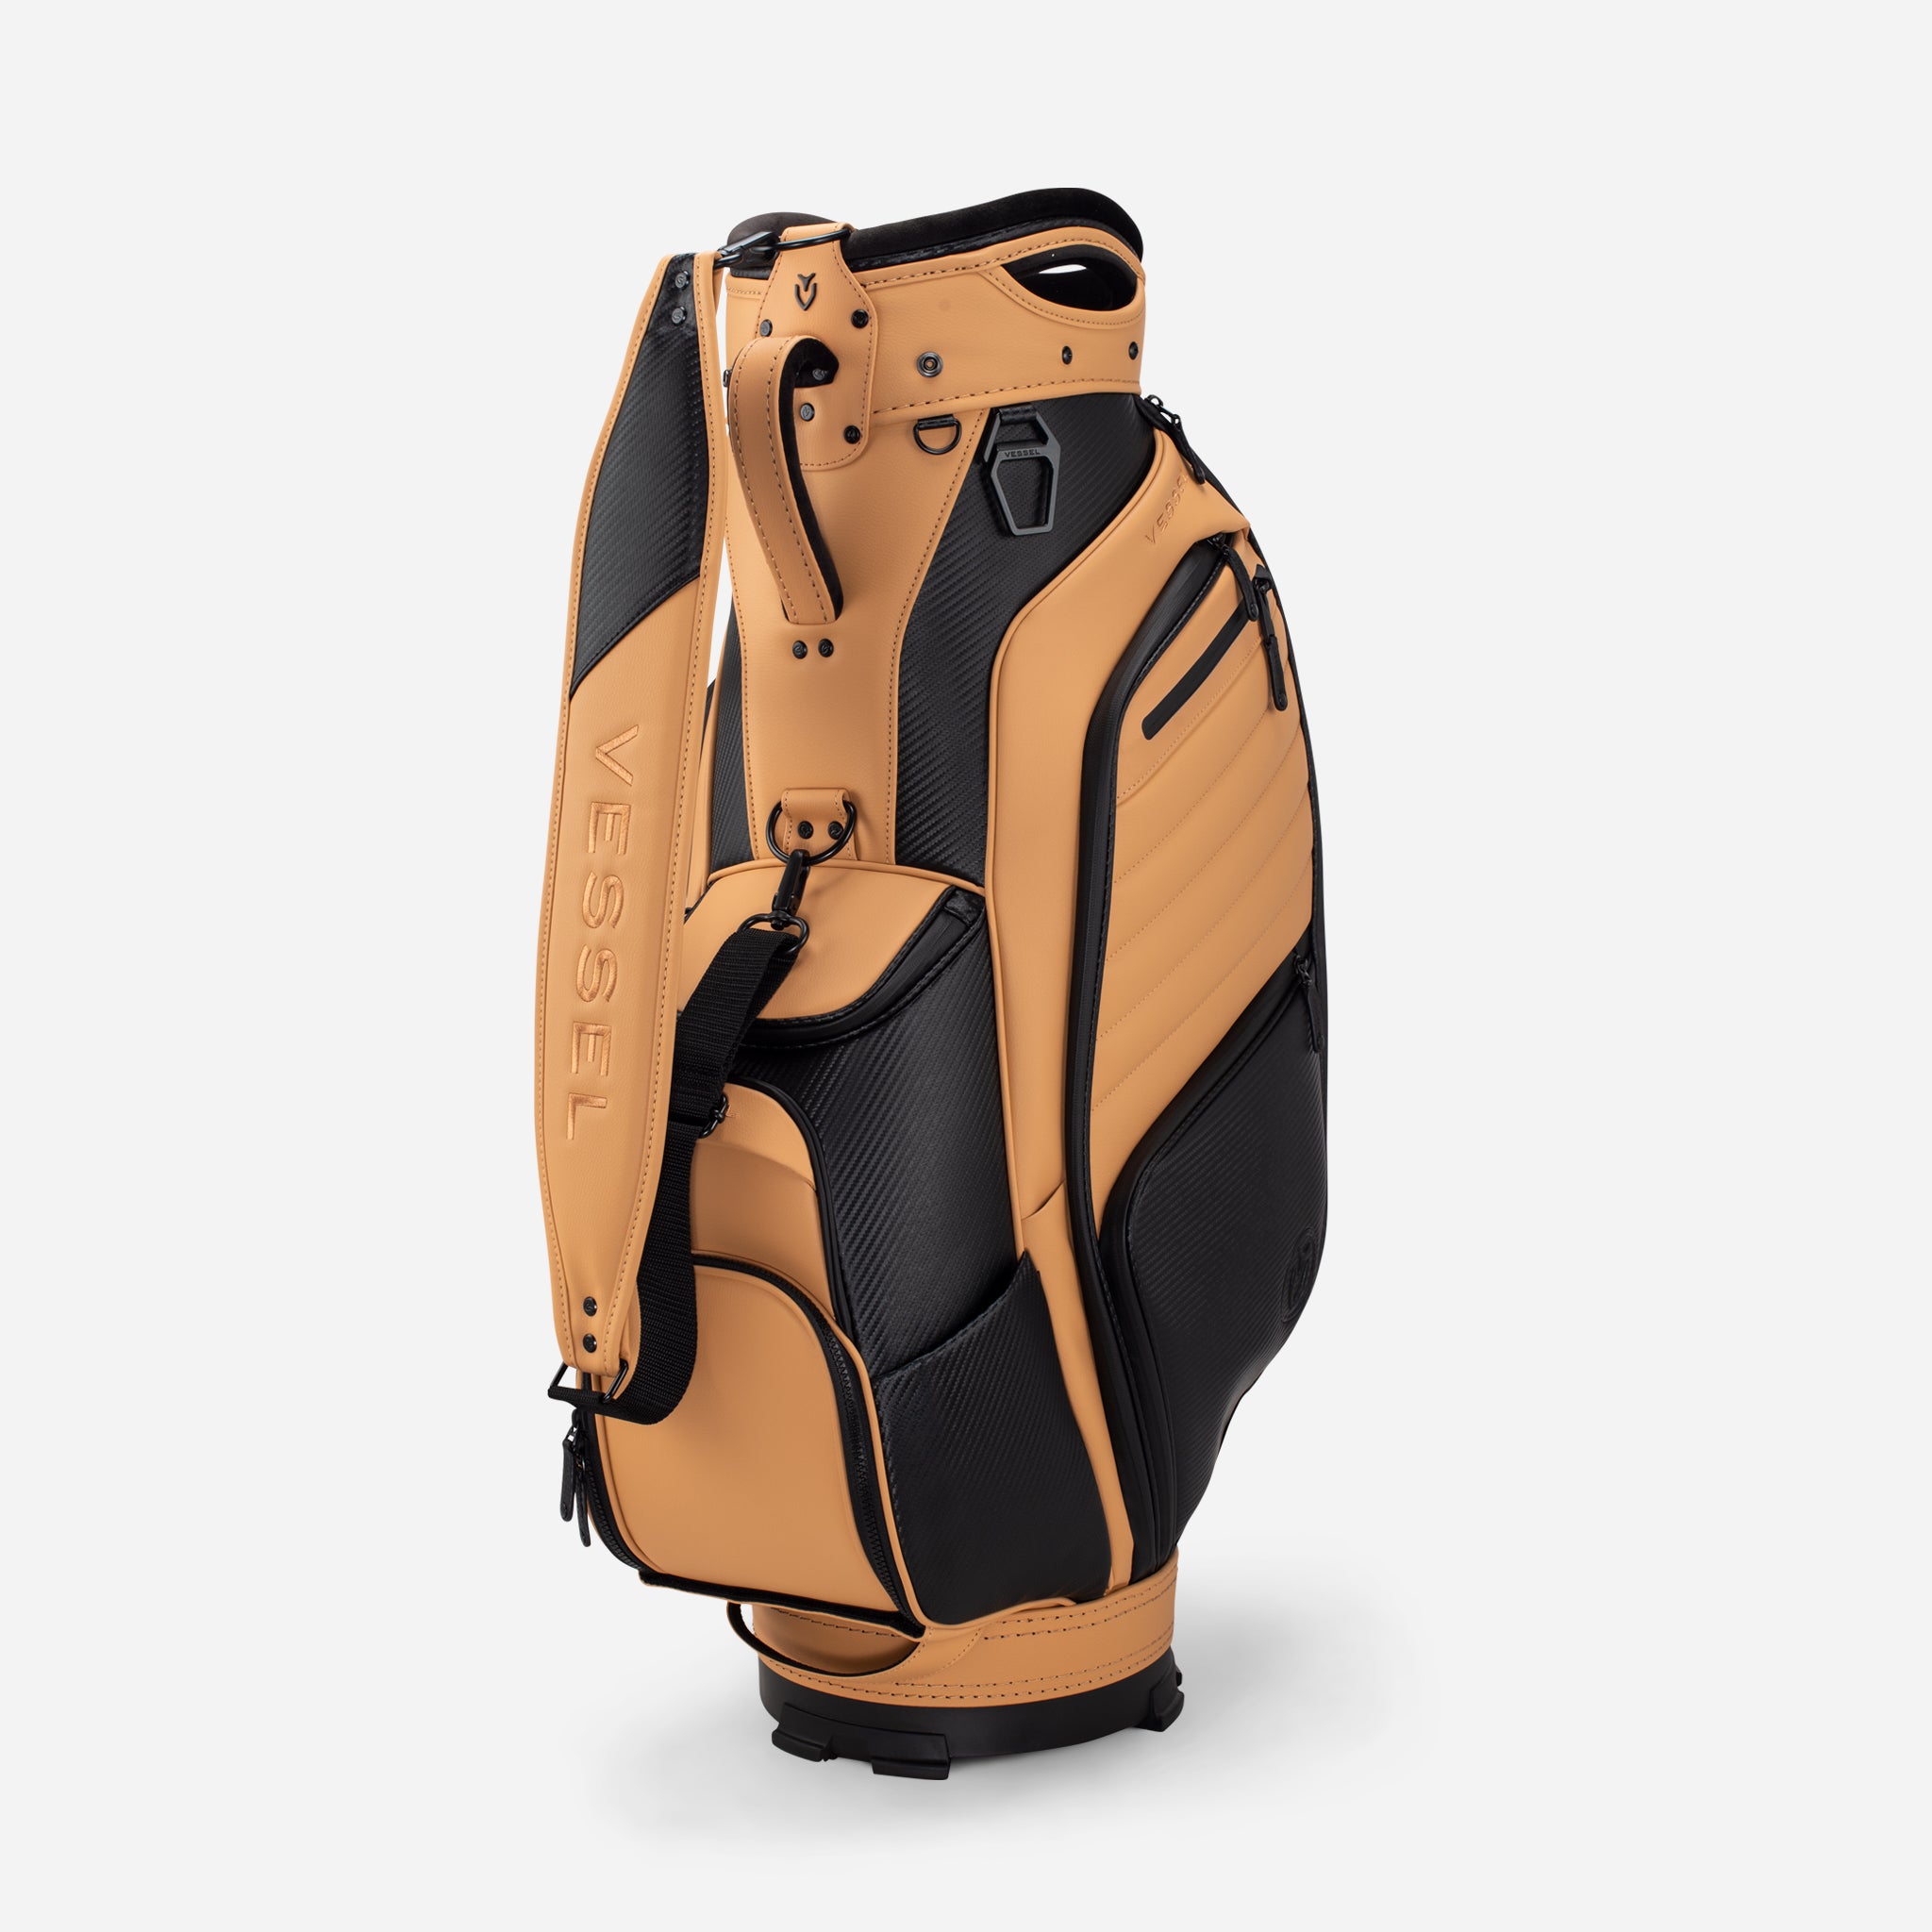 Vessel Lux Limited Edition Midsize Cart Golf Bag, Sports Equipment